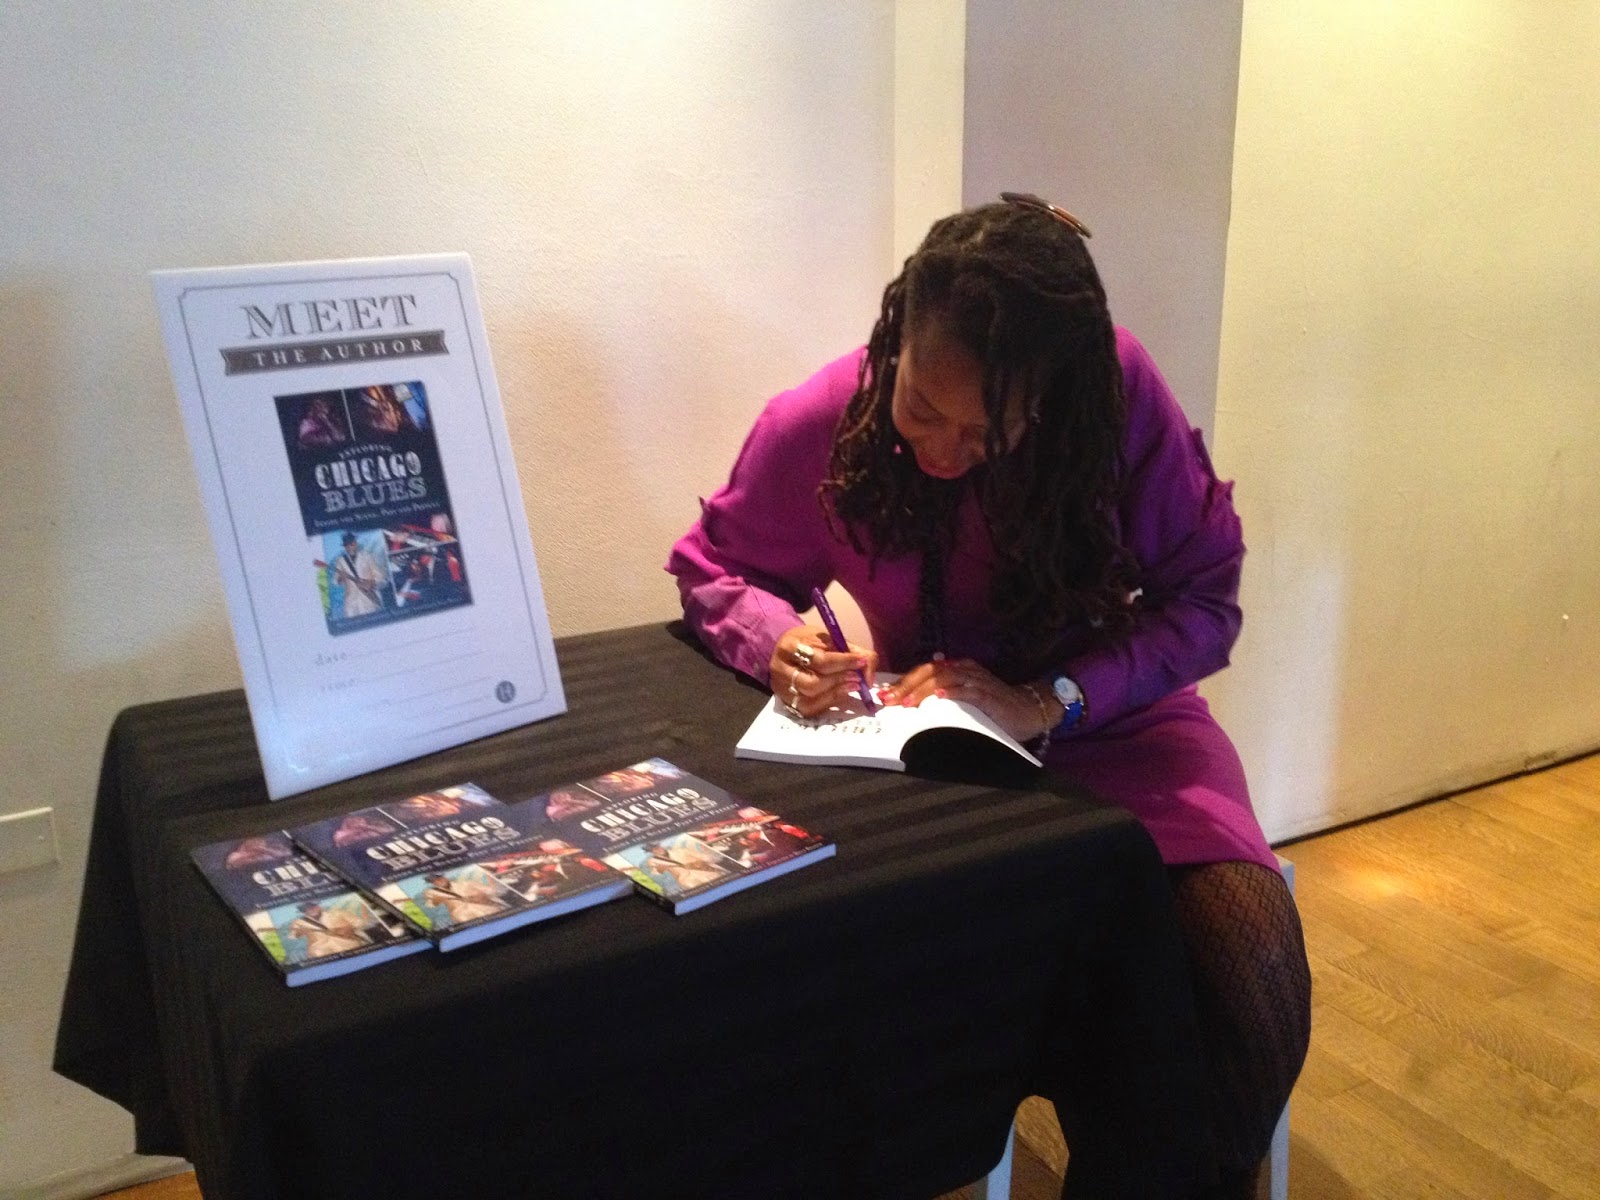 Rosalind Cummings Yeates Autographing her book Exploring Chicago Blues